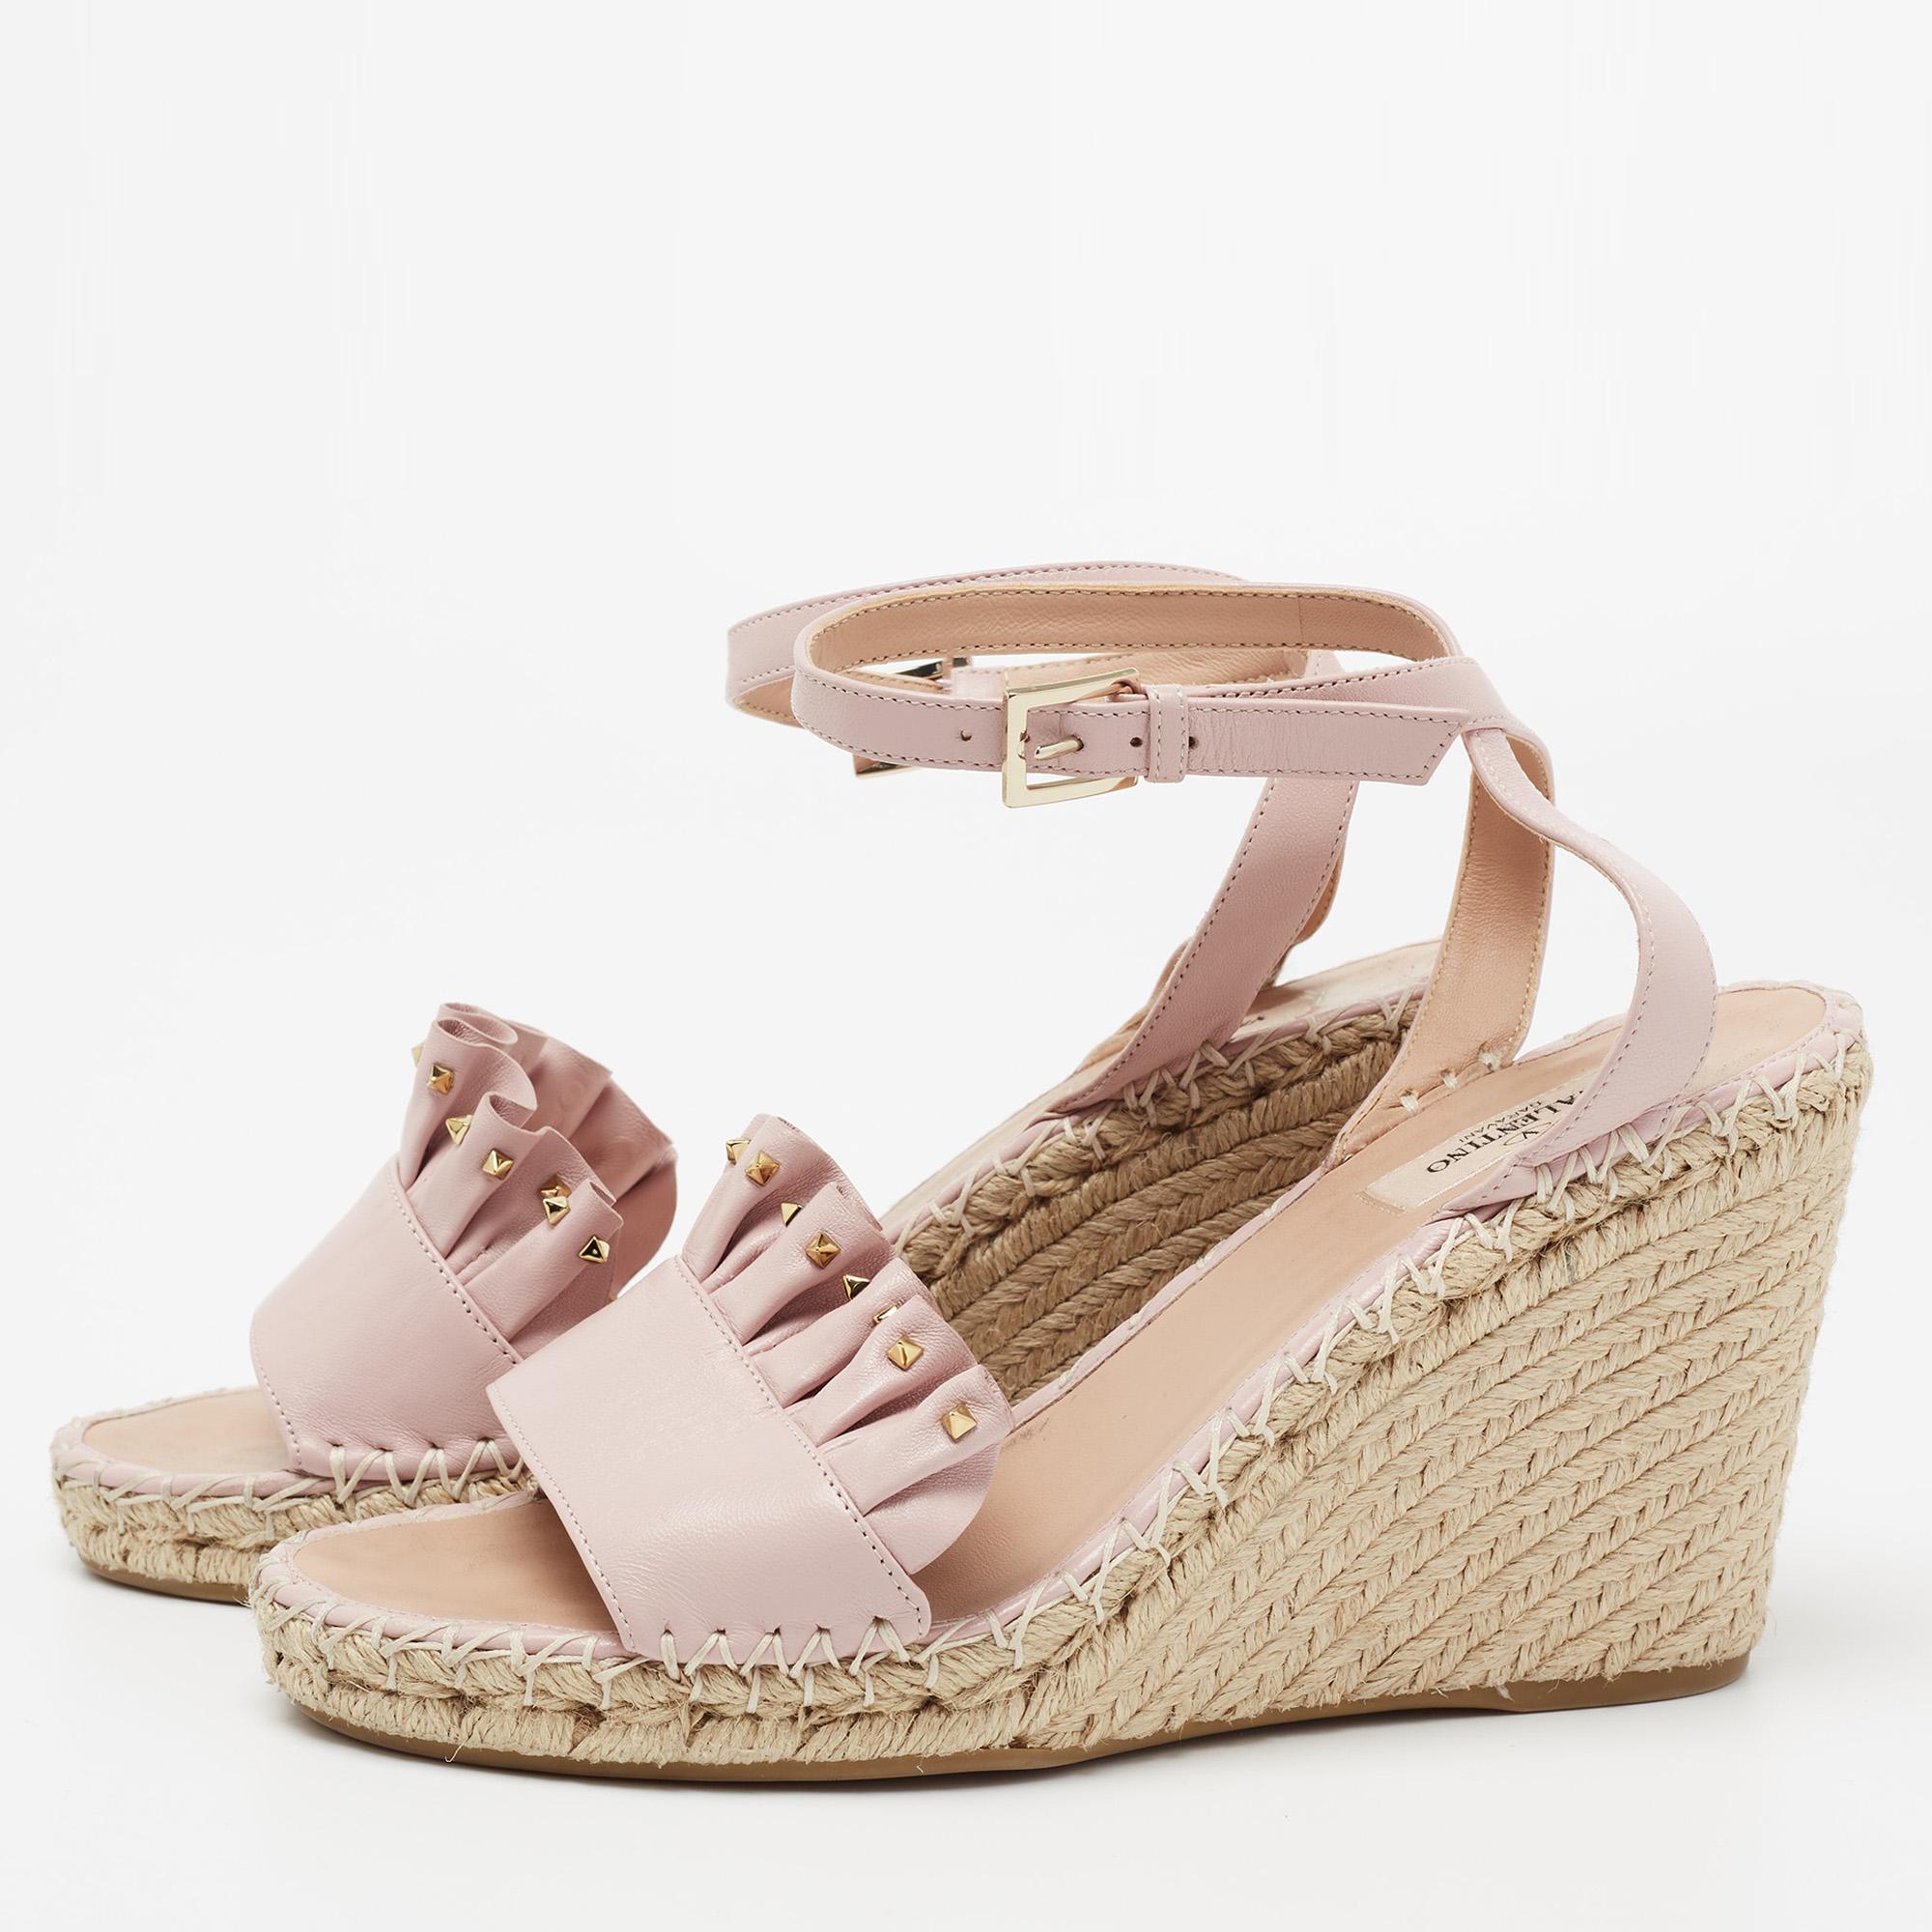 Embrace the season with these Valentino sandals on your feet. Made from light pink leather, they have open toes, ankle straps with buckle closure, and espadrille wedge heels.

